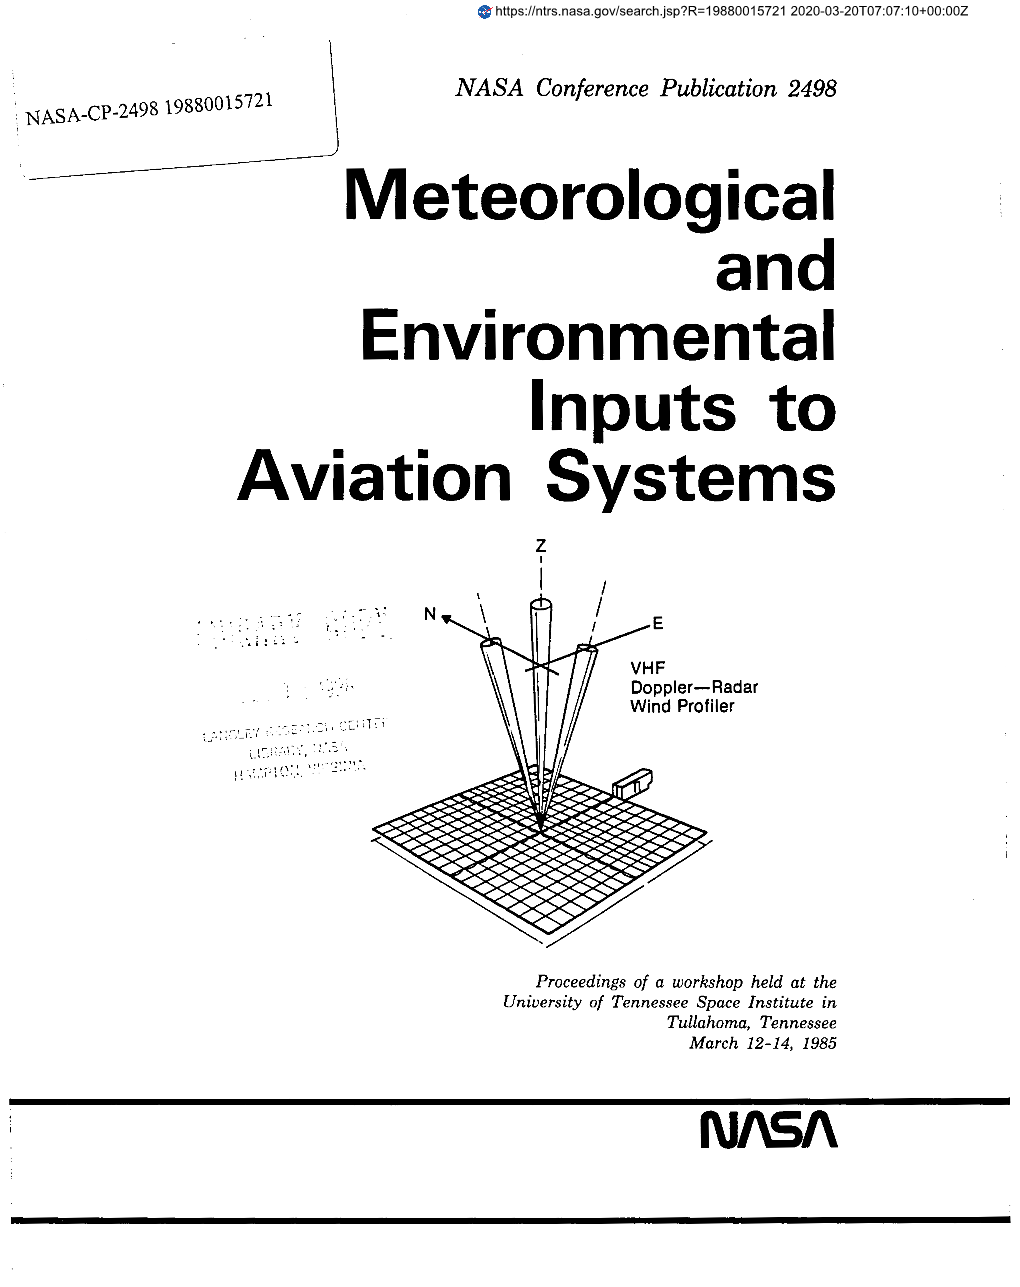 Meteorological and Environmental Inputs to Aviation Systems